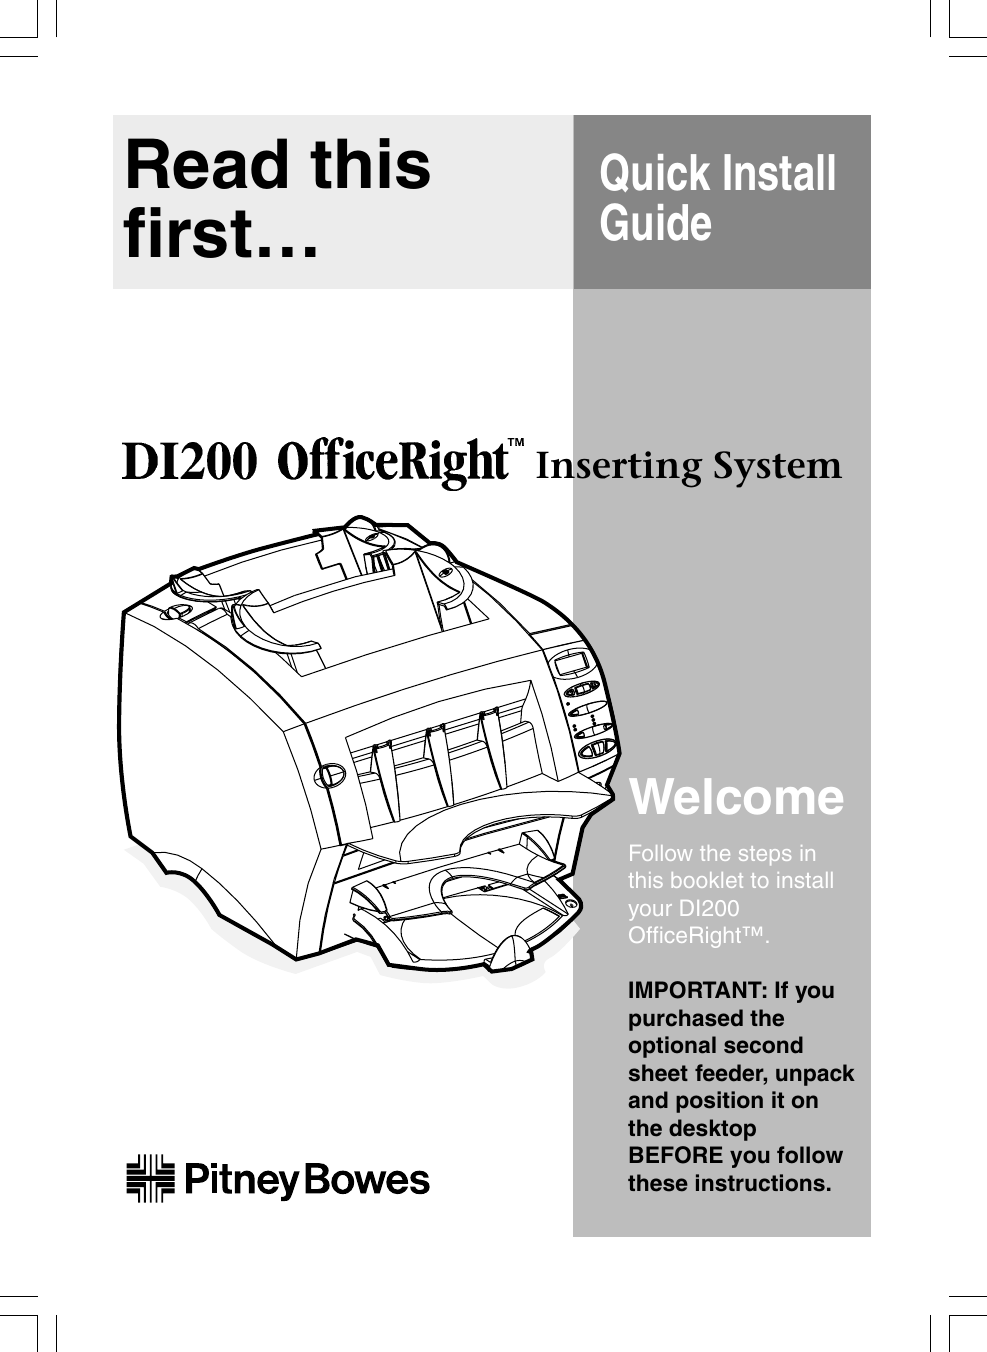 Page 1 of 12 - Pitney-Bowes Pitney-Bowes-Officeright-Di200-Users-Manual- DI200 OfficeRight Inserting System Quick Install Guide SV40189-QS REv. A 9/02  Pitney-bowes-officeright-di200-users-manual